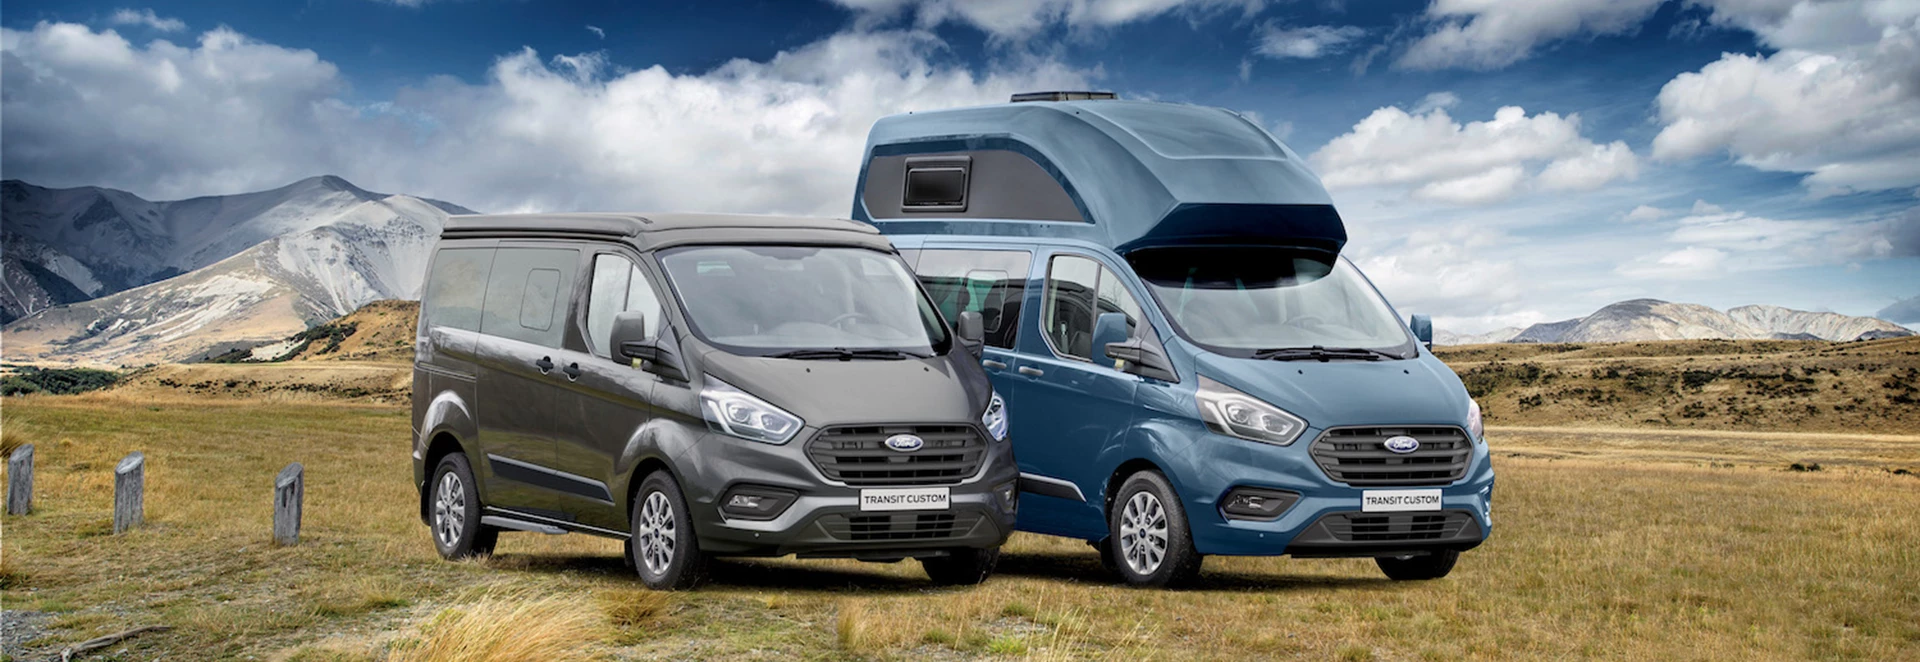 Ford reveals new campervan – the Transit Custom Nugget